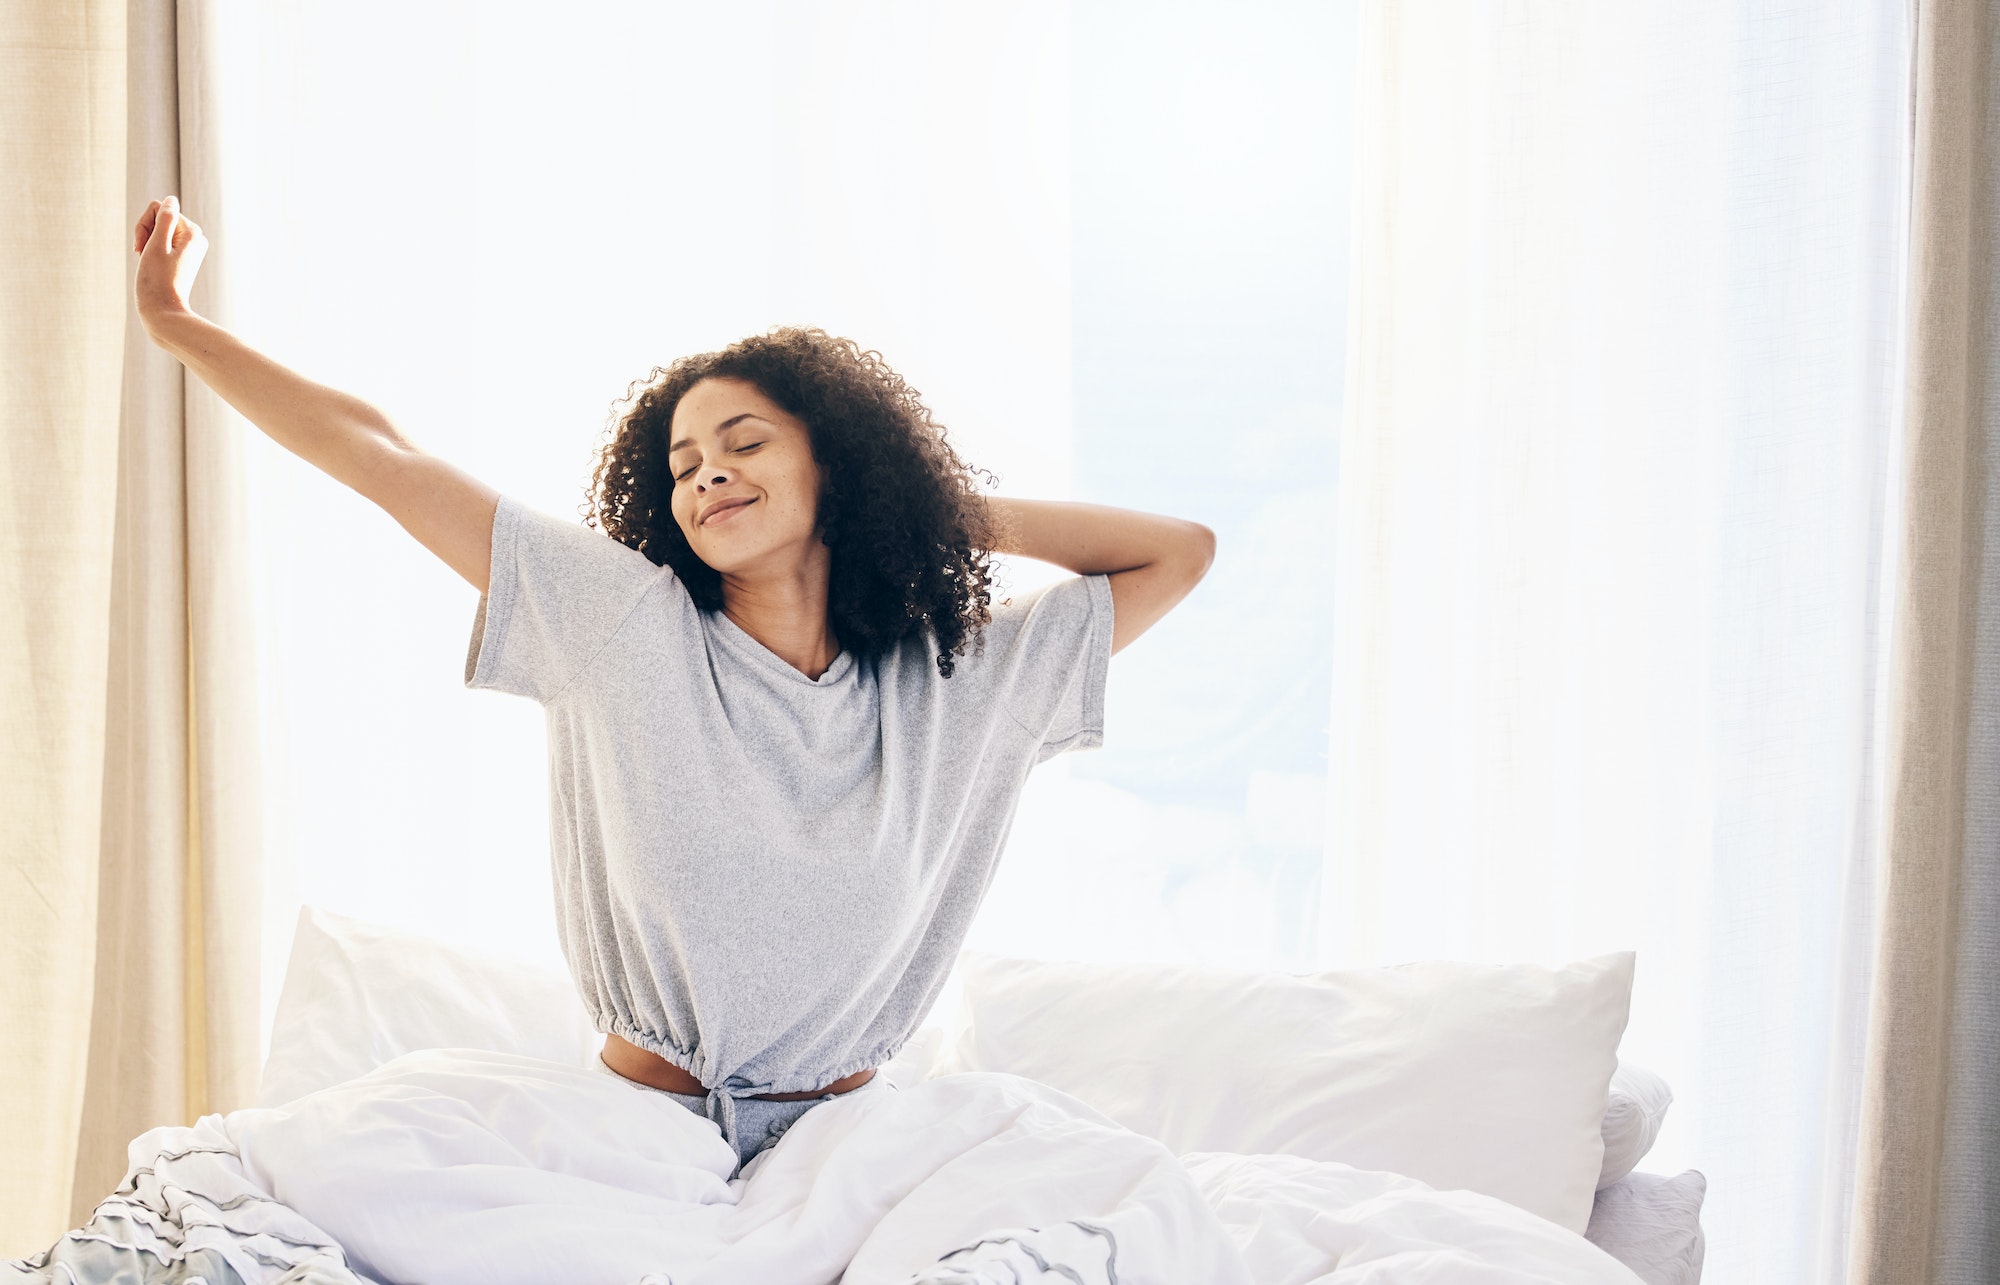 Black woman, morning stretching and waking up in home bedroom after sleeping or resting. Relax, pea